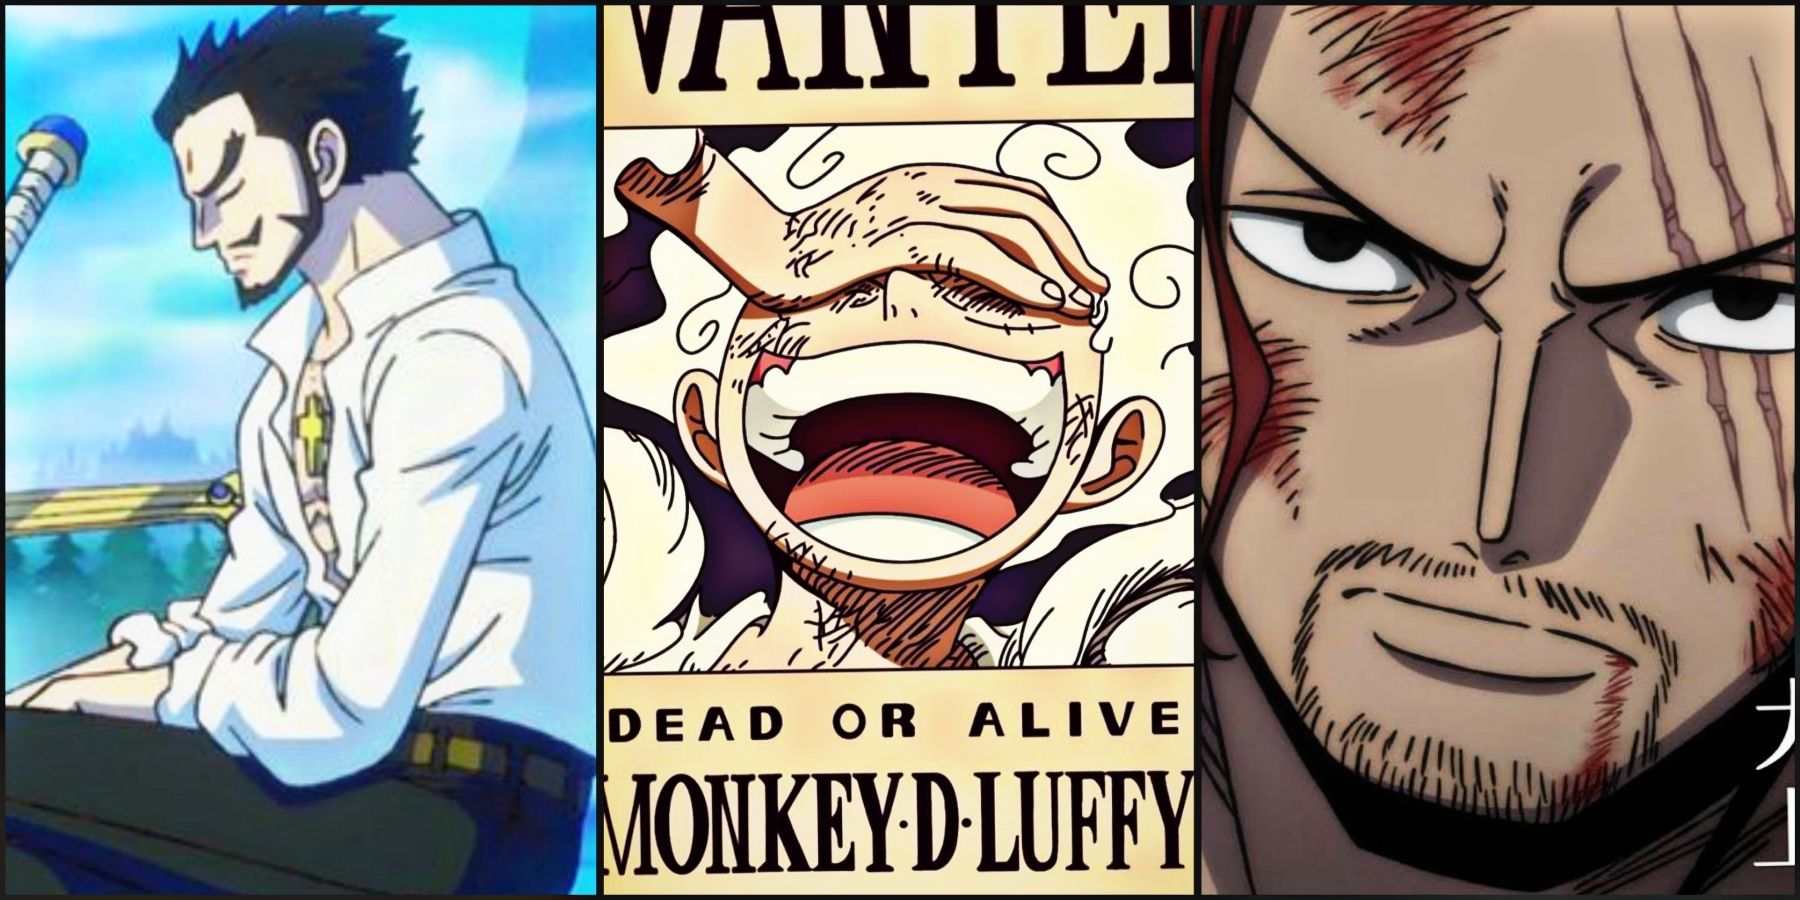 What is the point of bounties in One Piece world if the bounties